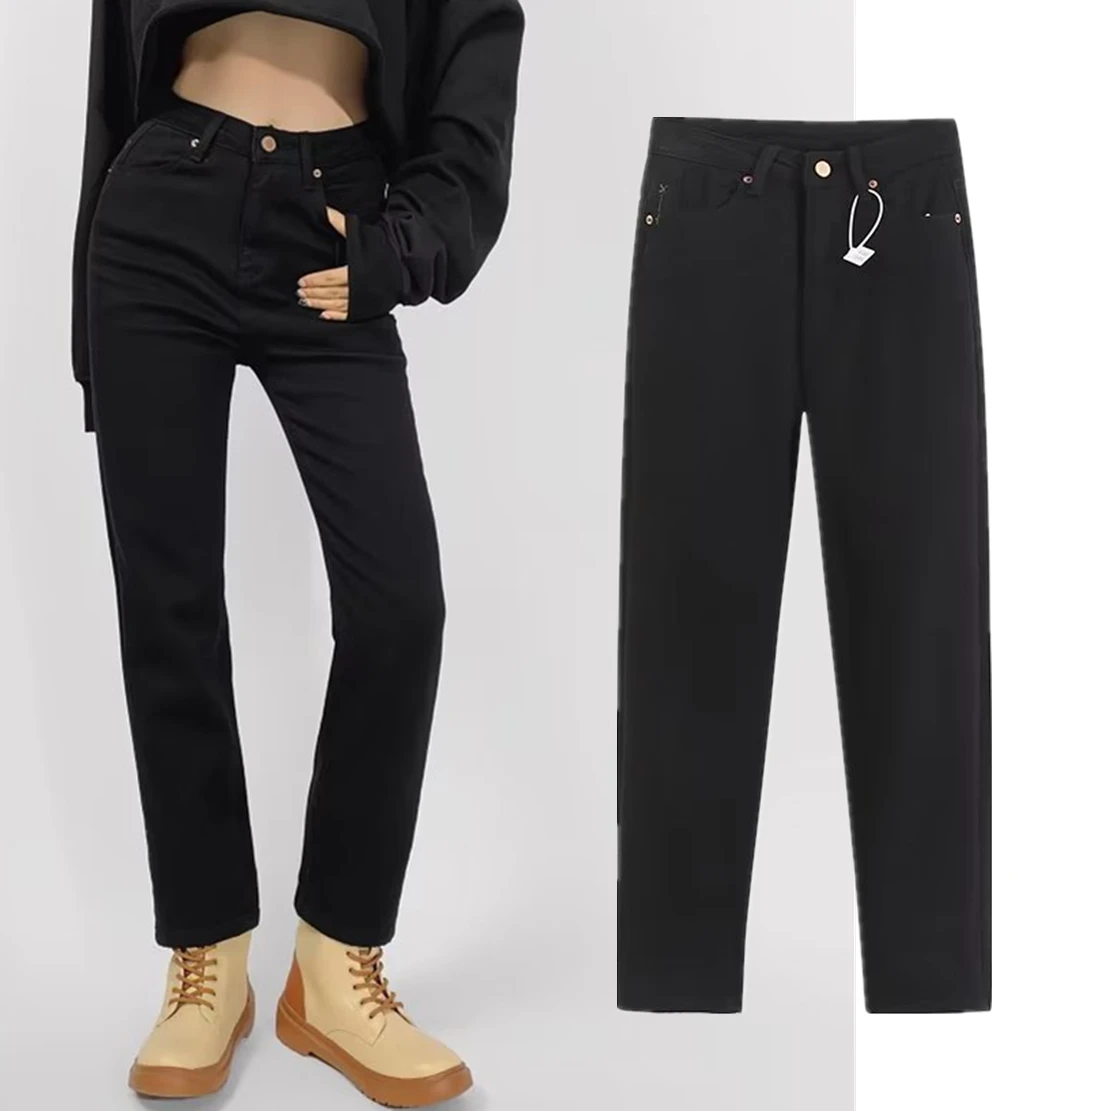 Withered  New Women's Cloth Jeans Women Fashion Black Denim Pants For Winter Plush Warm